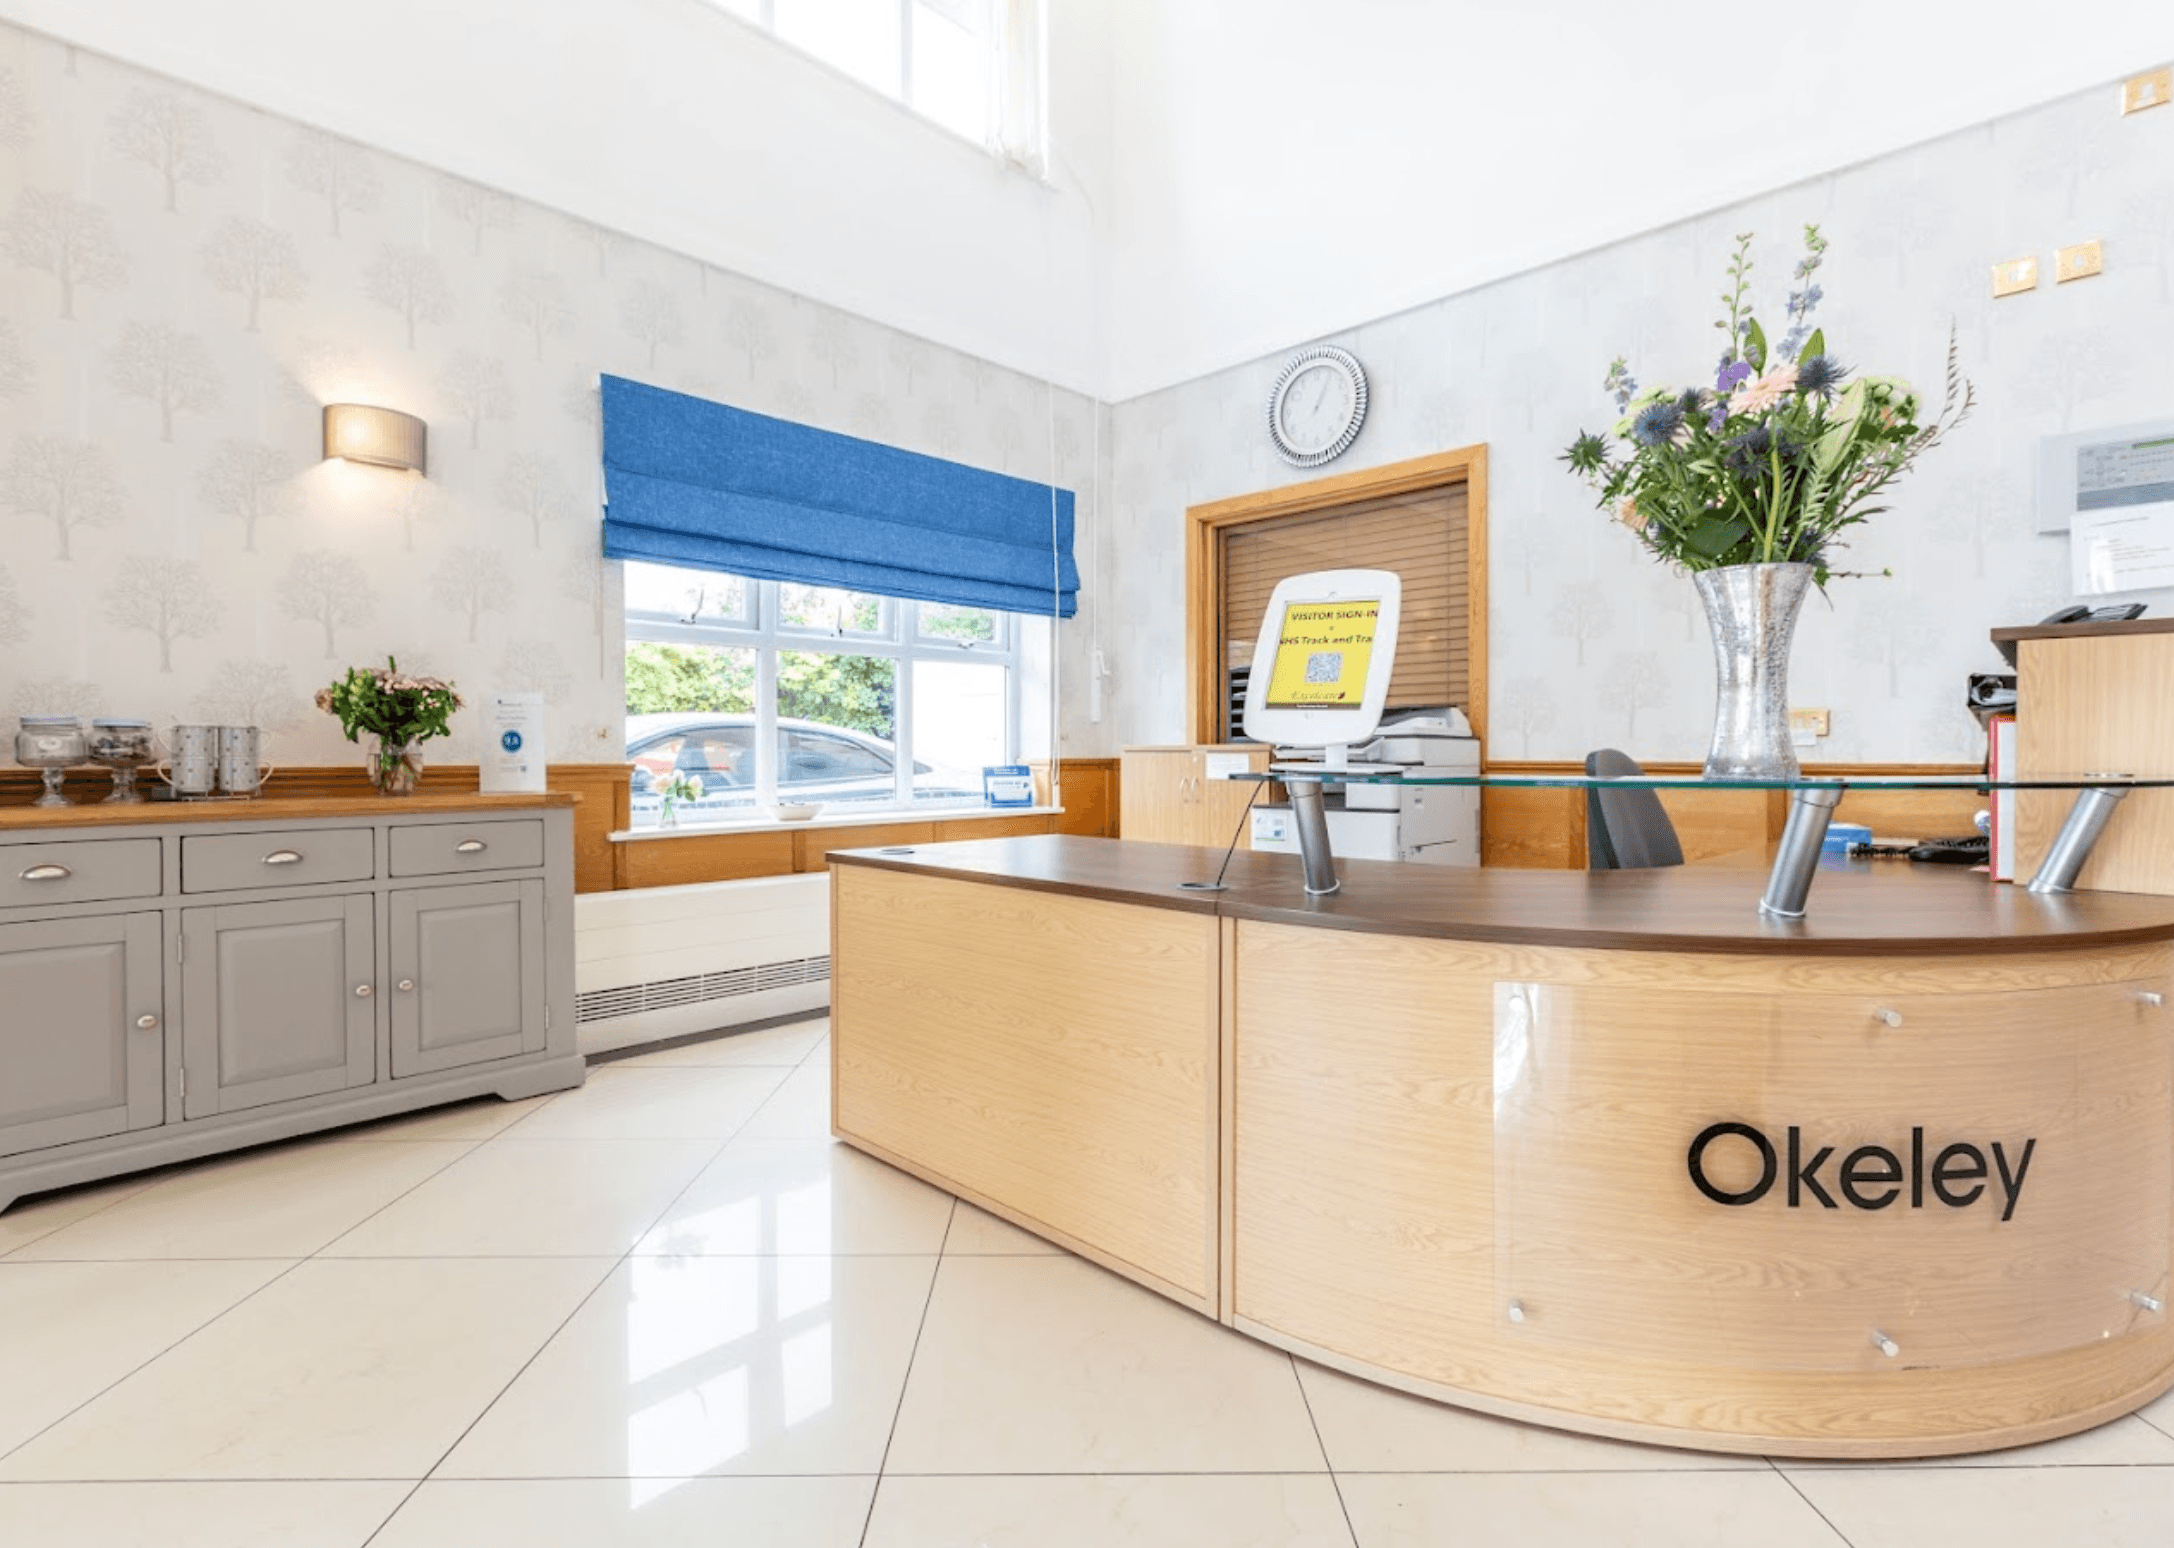 Reception of Okeley care home in Chelmsford